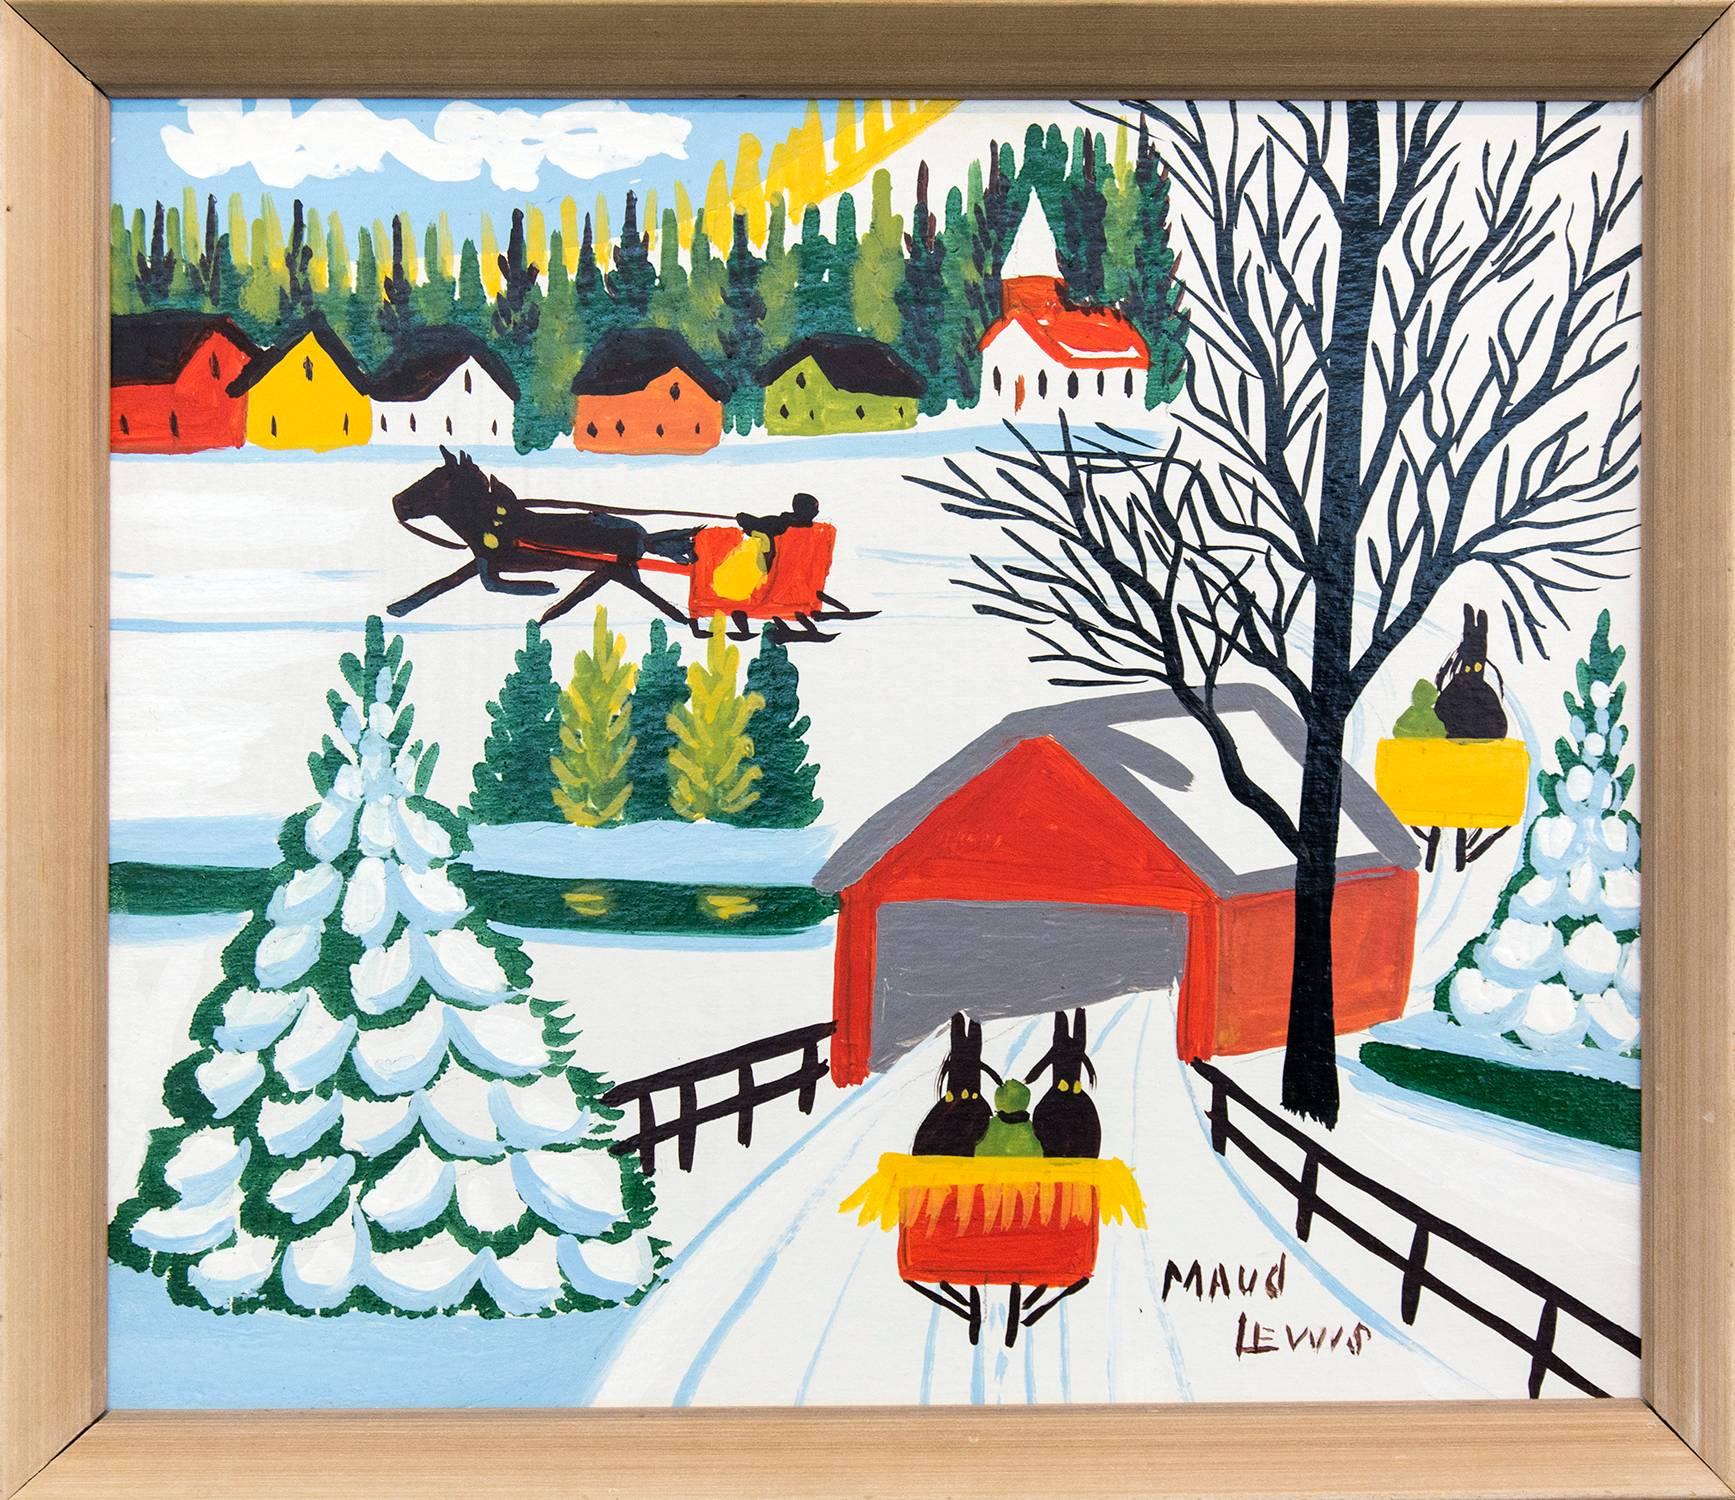 Maud Lewis Landscape Painting - Covered Bridge in Winter